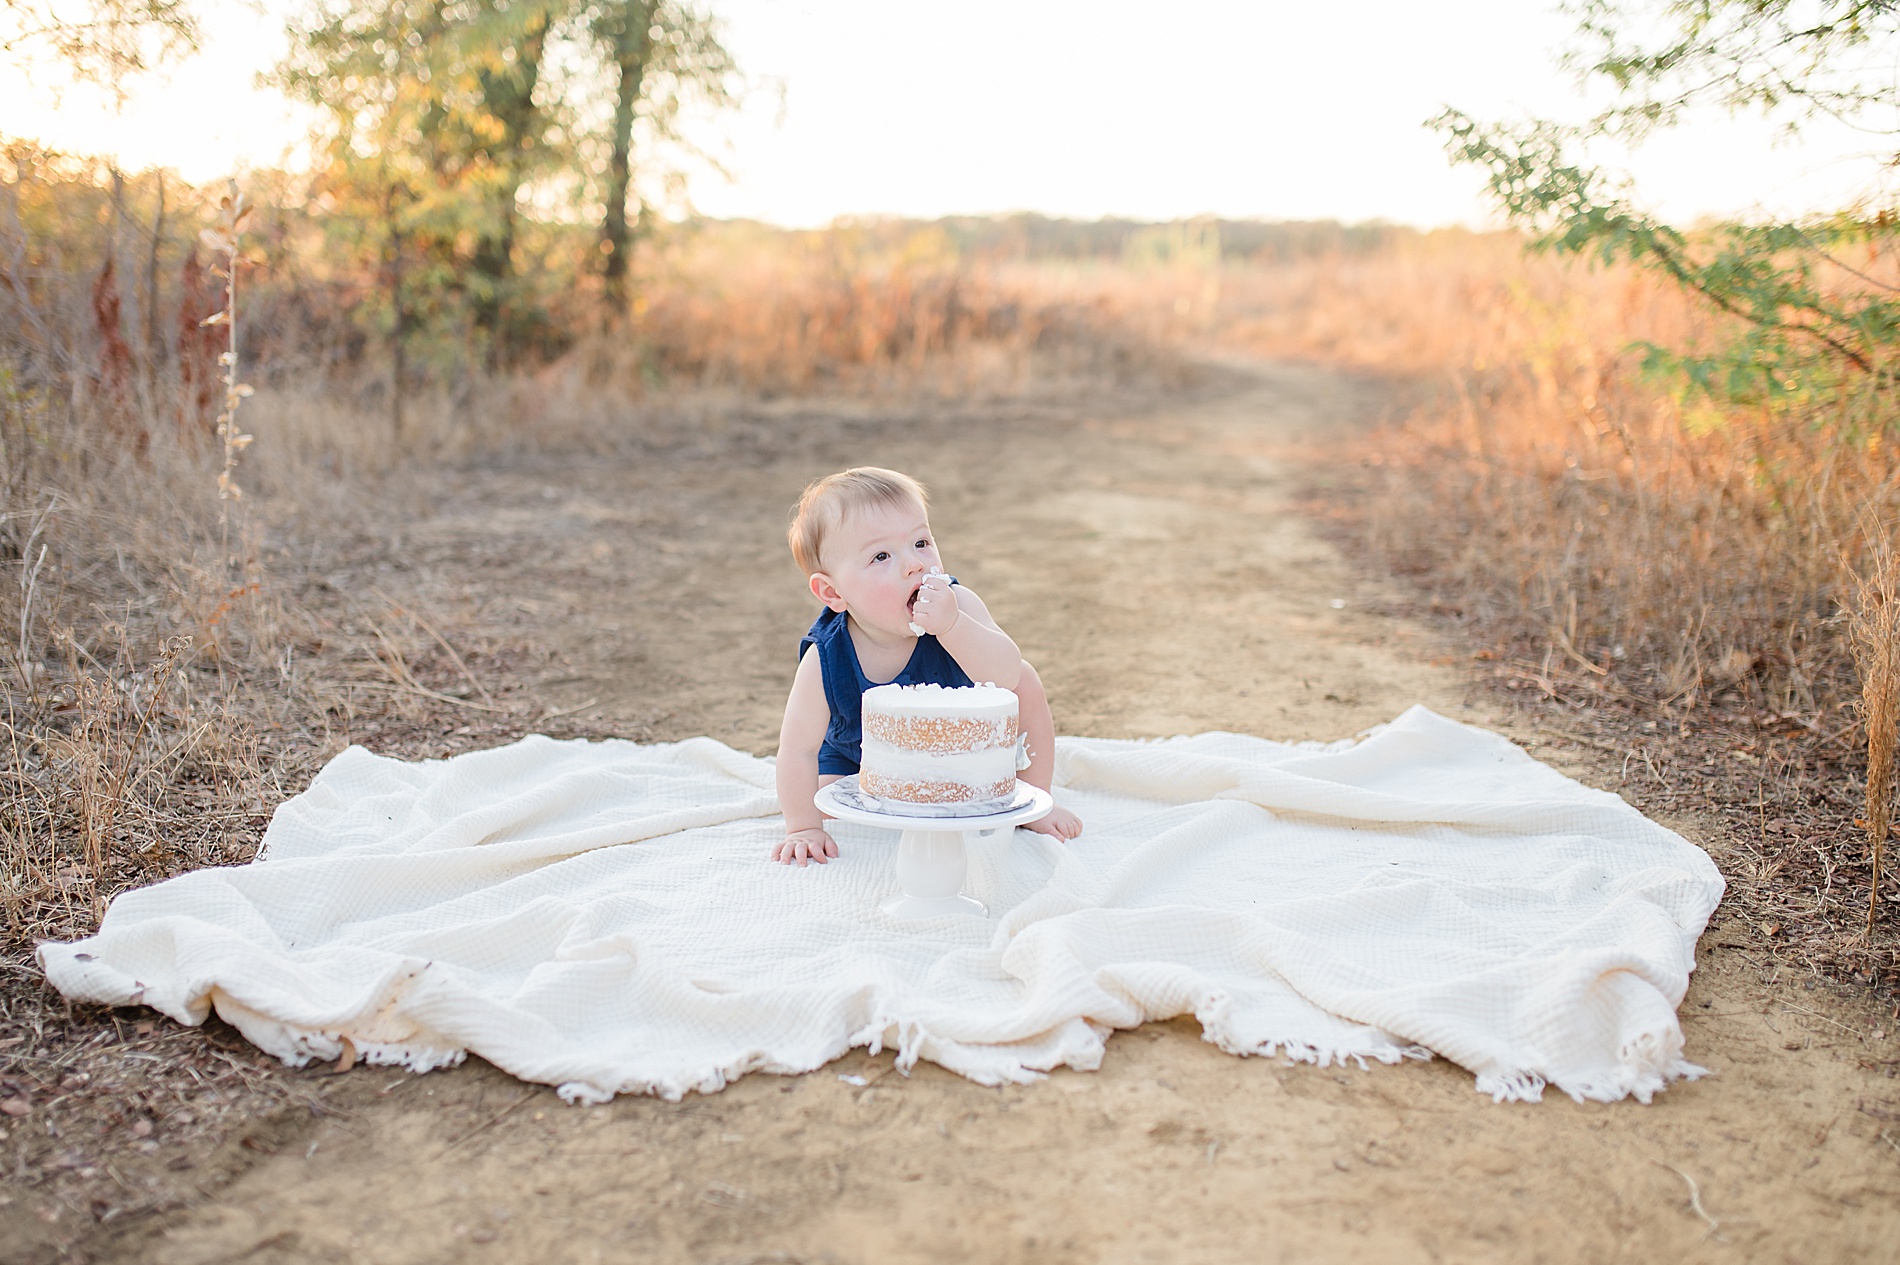 outdoor cake smash session photographed by Lindsey Dutton Photography, a Dallas newborn photographer
